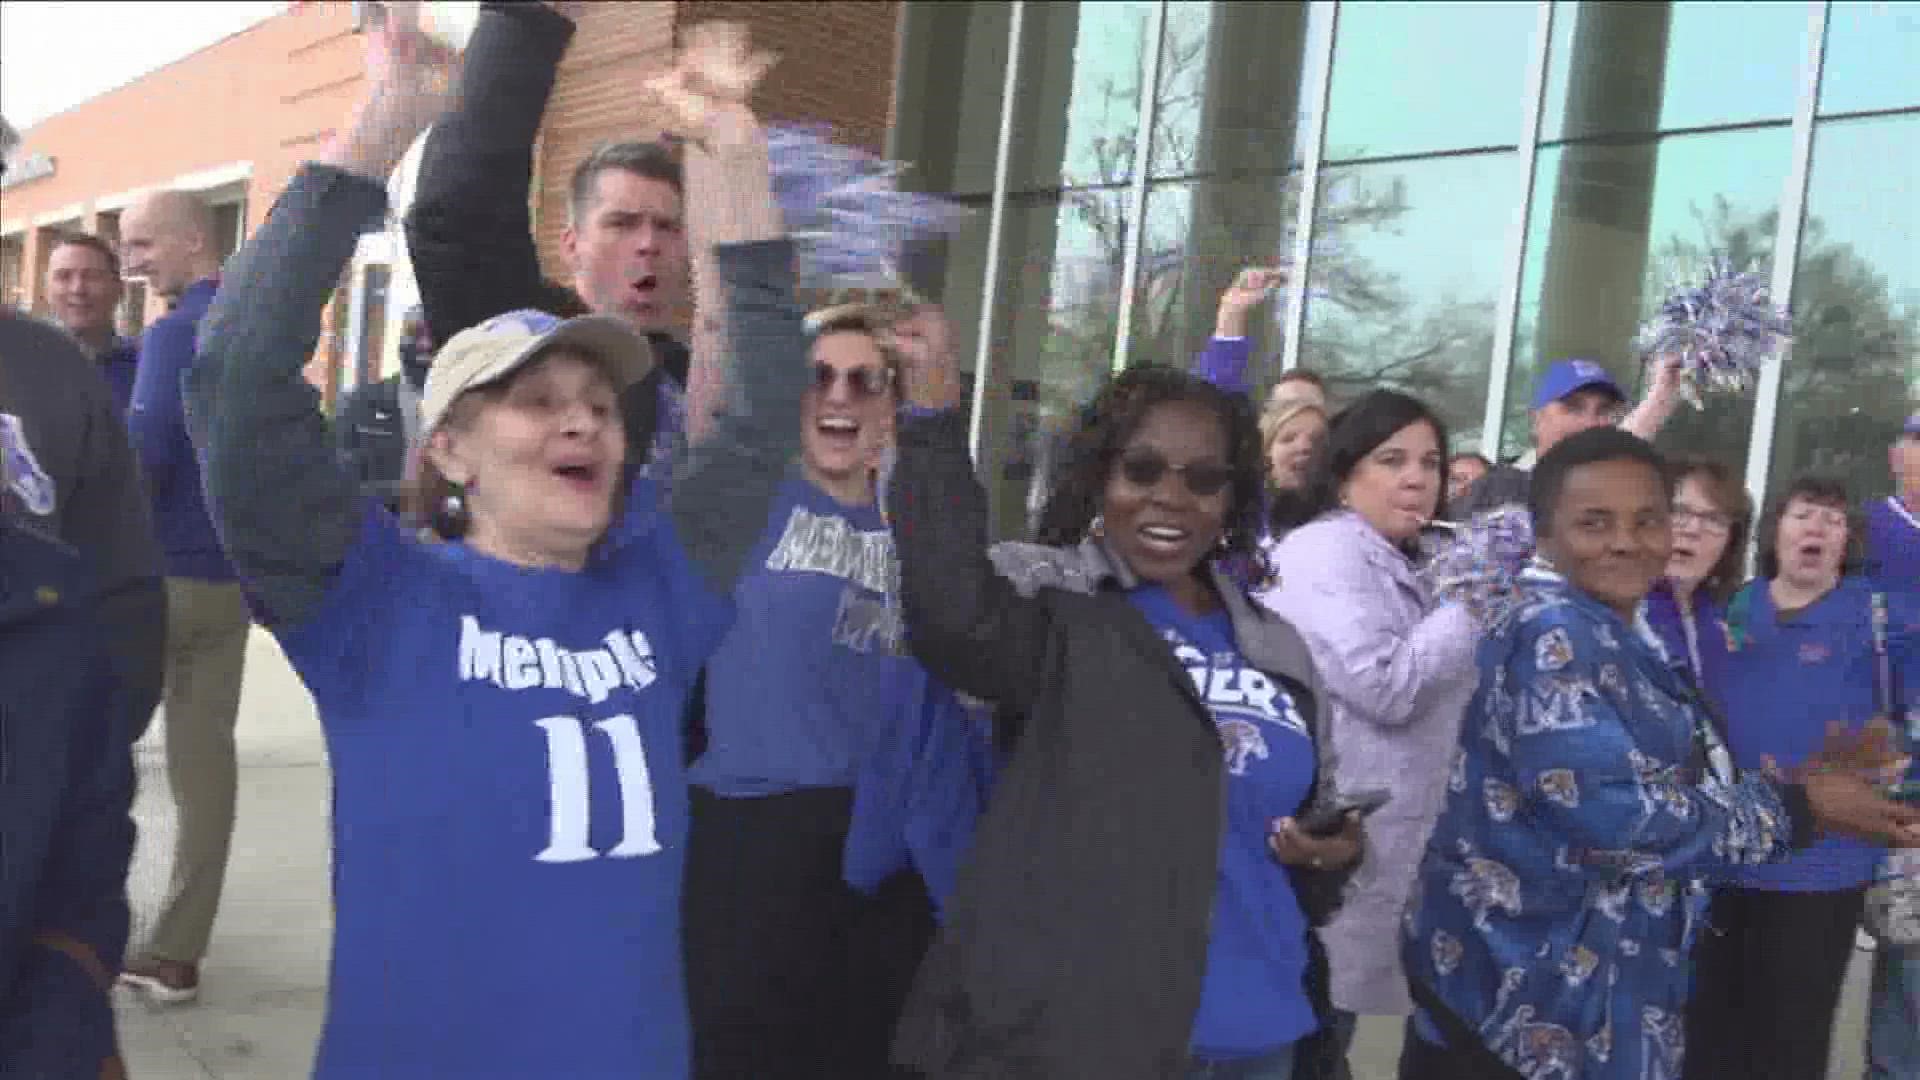 Memphis received support from fans as they boarded the bus to head to the NCAA Tournament for the first time since 2014.